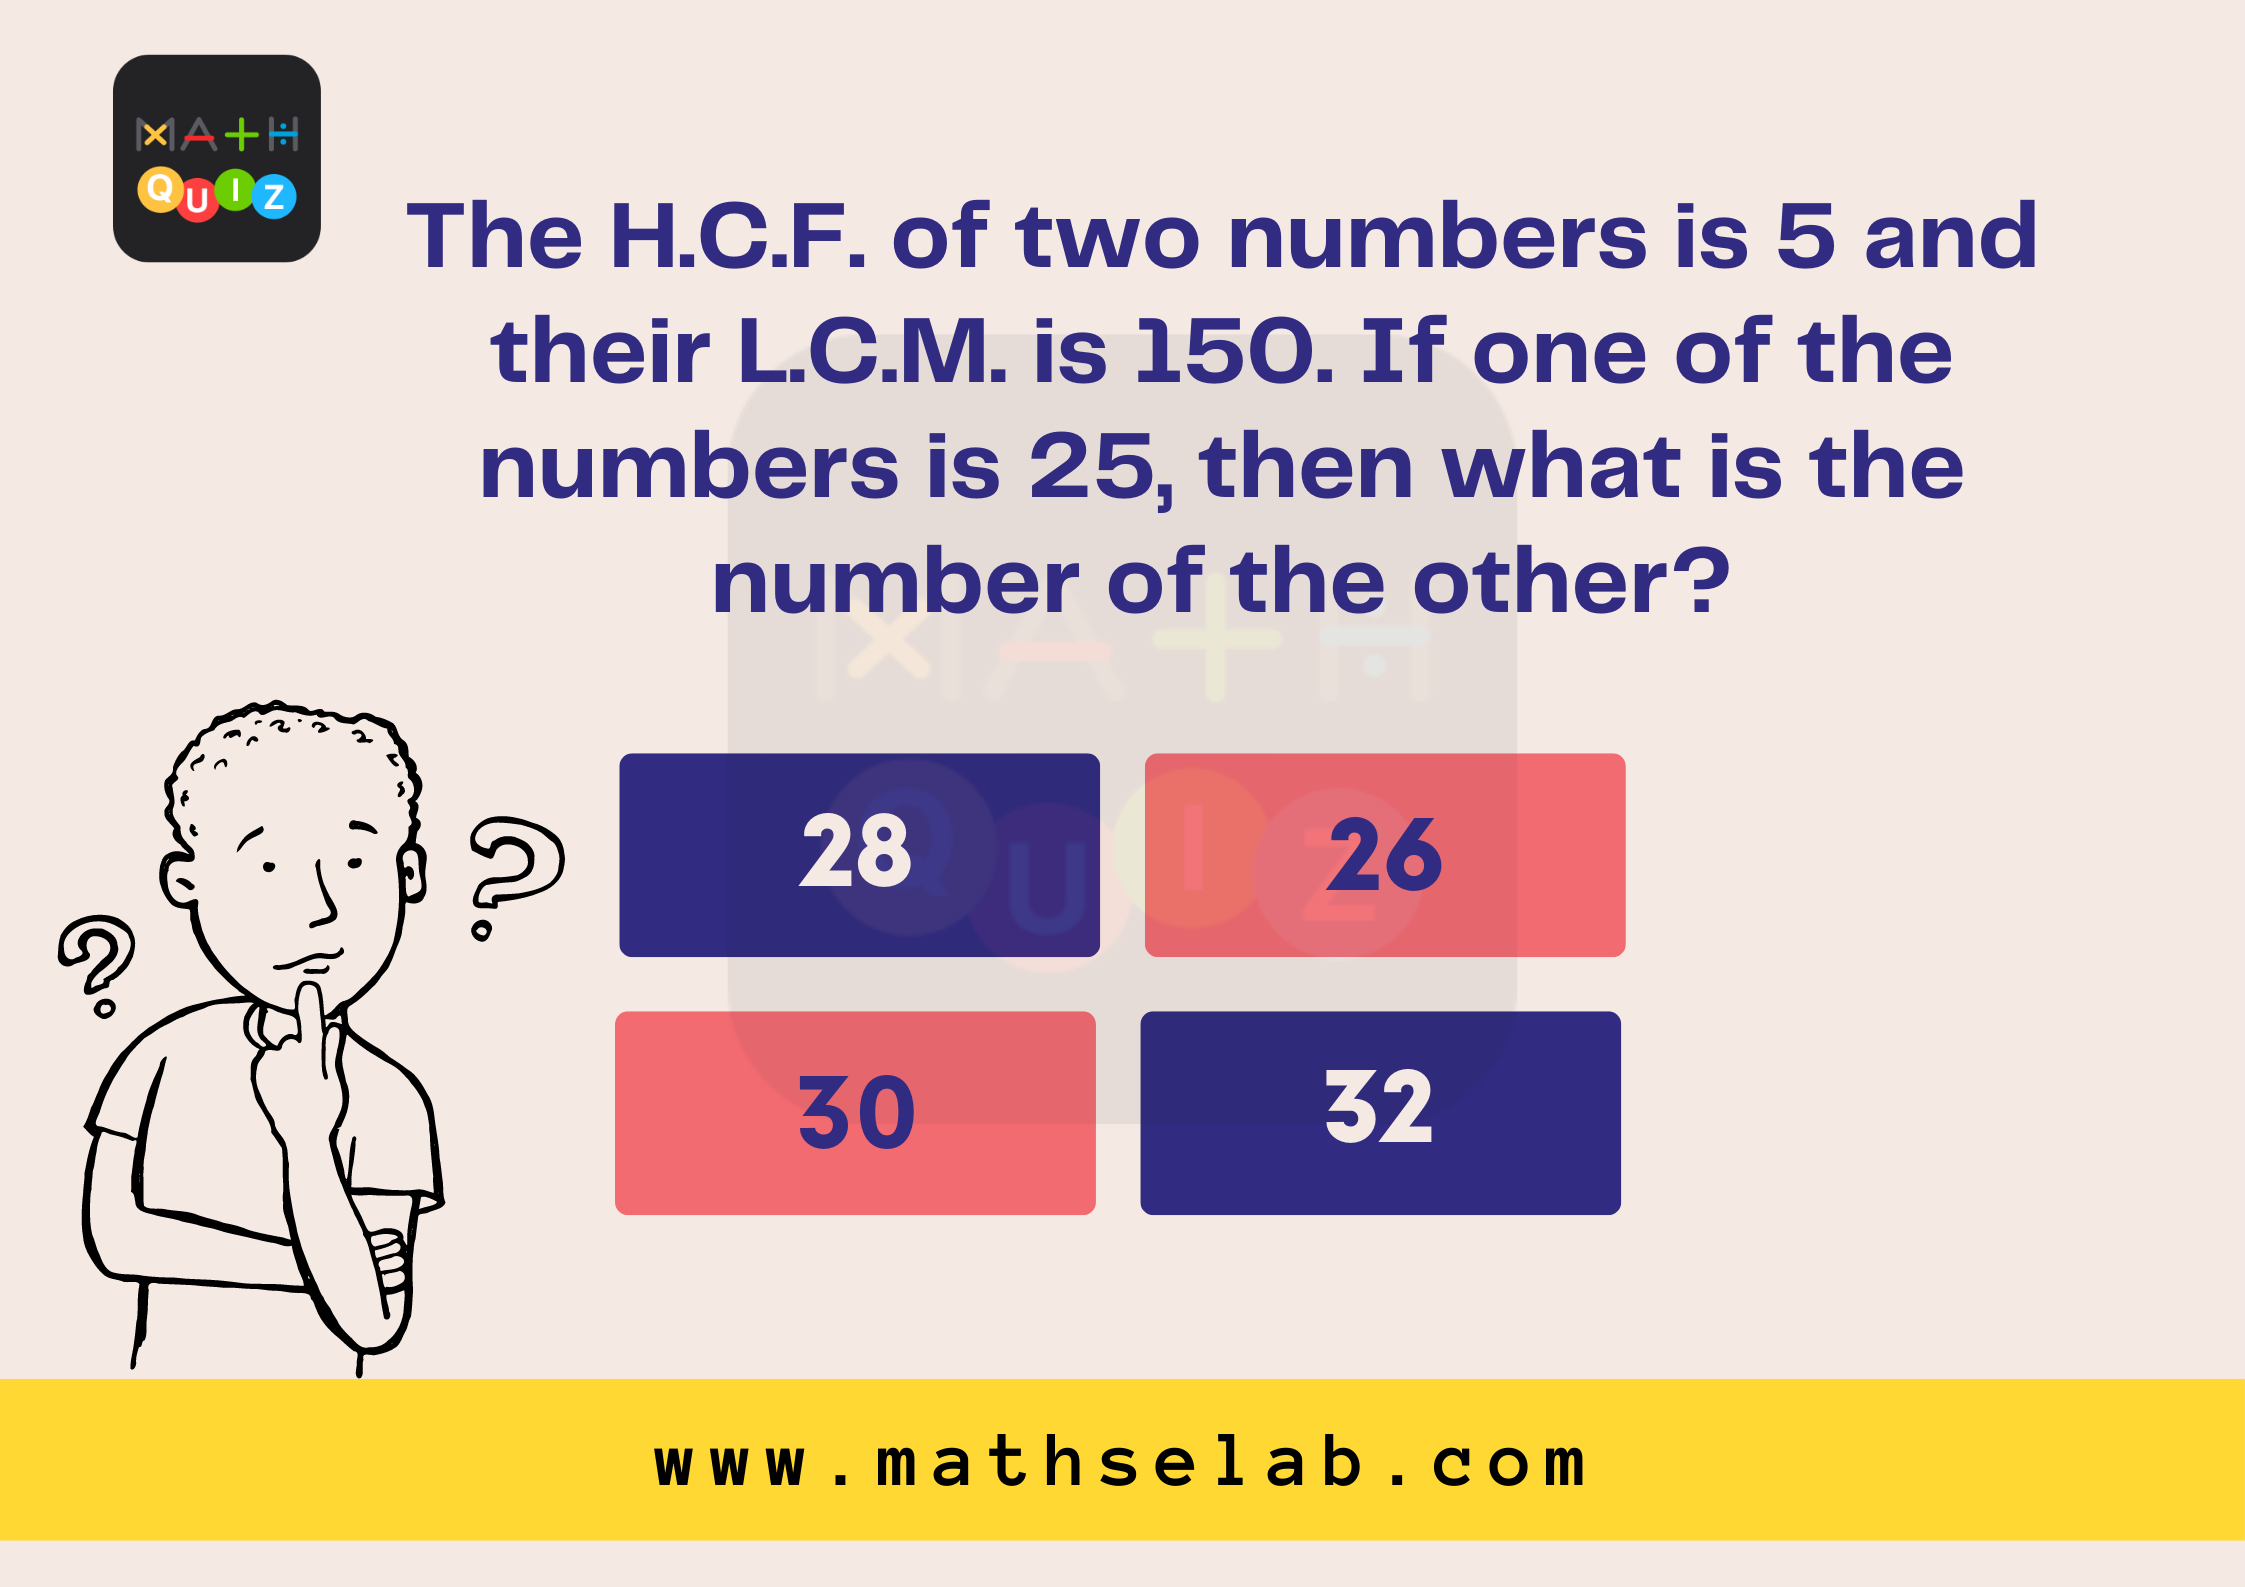 The H.C.F. of two numbers is 5 and their L.C.M. is 150. If one of the numbers is 25, then what is the number of the other - mathselab.com